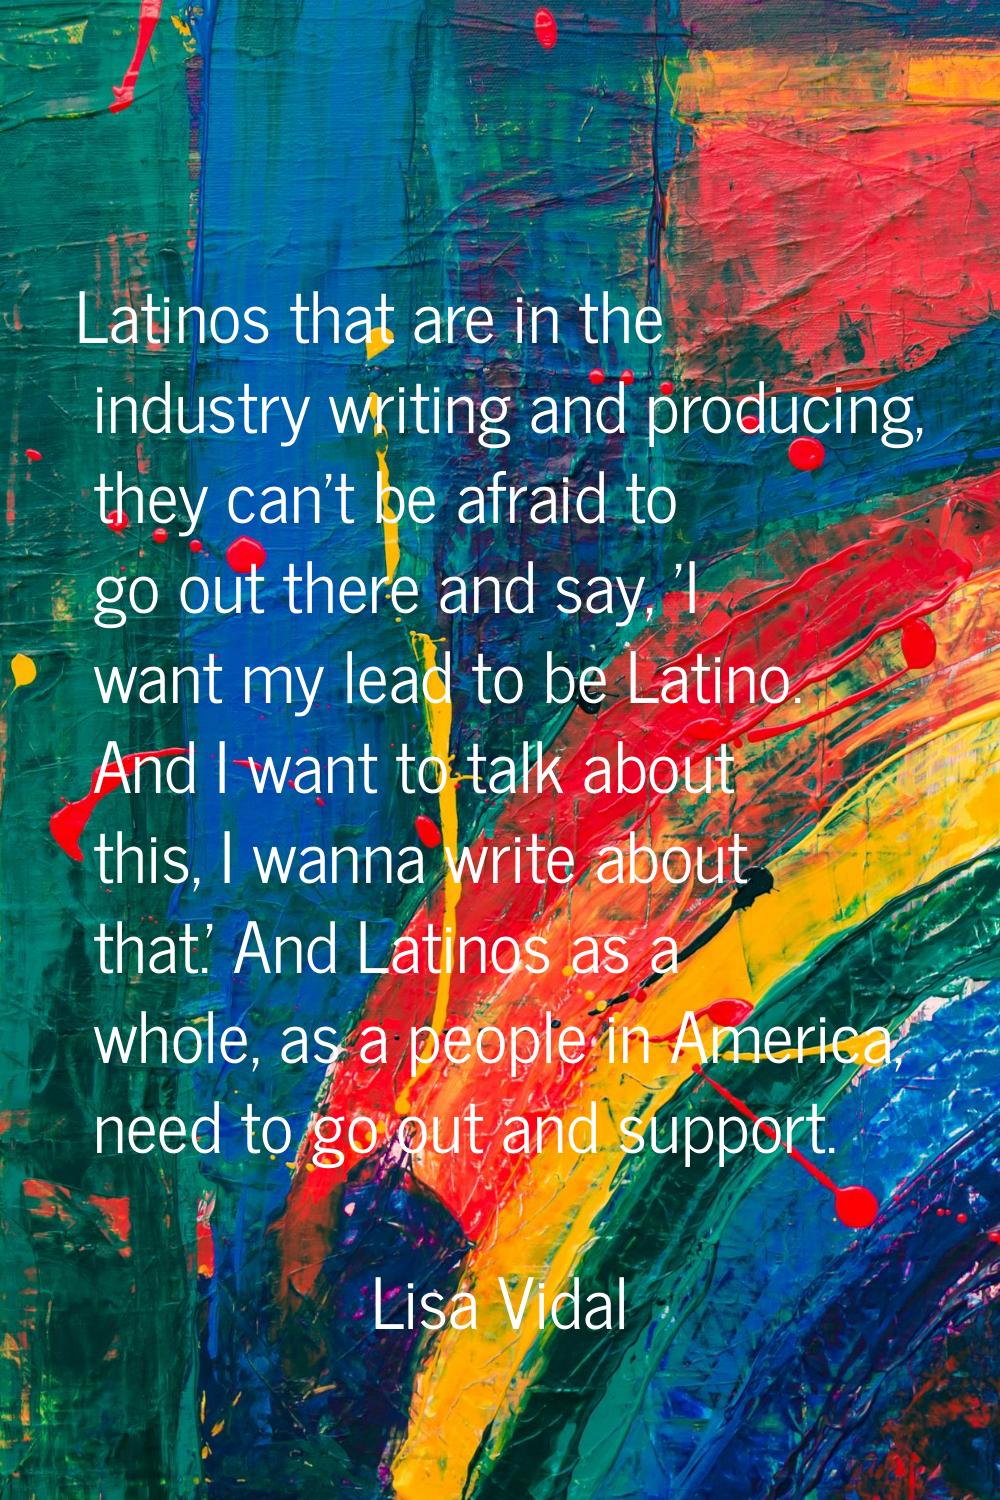 Latinos that are in the industry writing and producing, they can't be afraid to go out there and sa